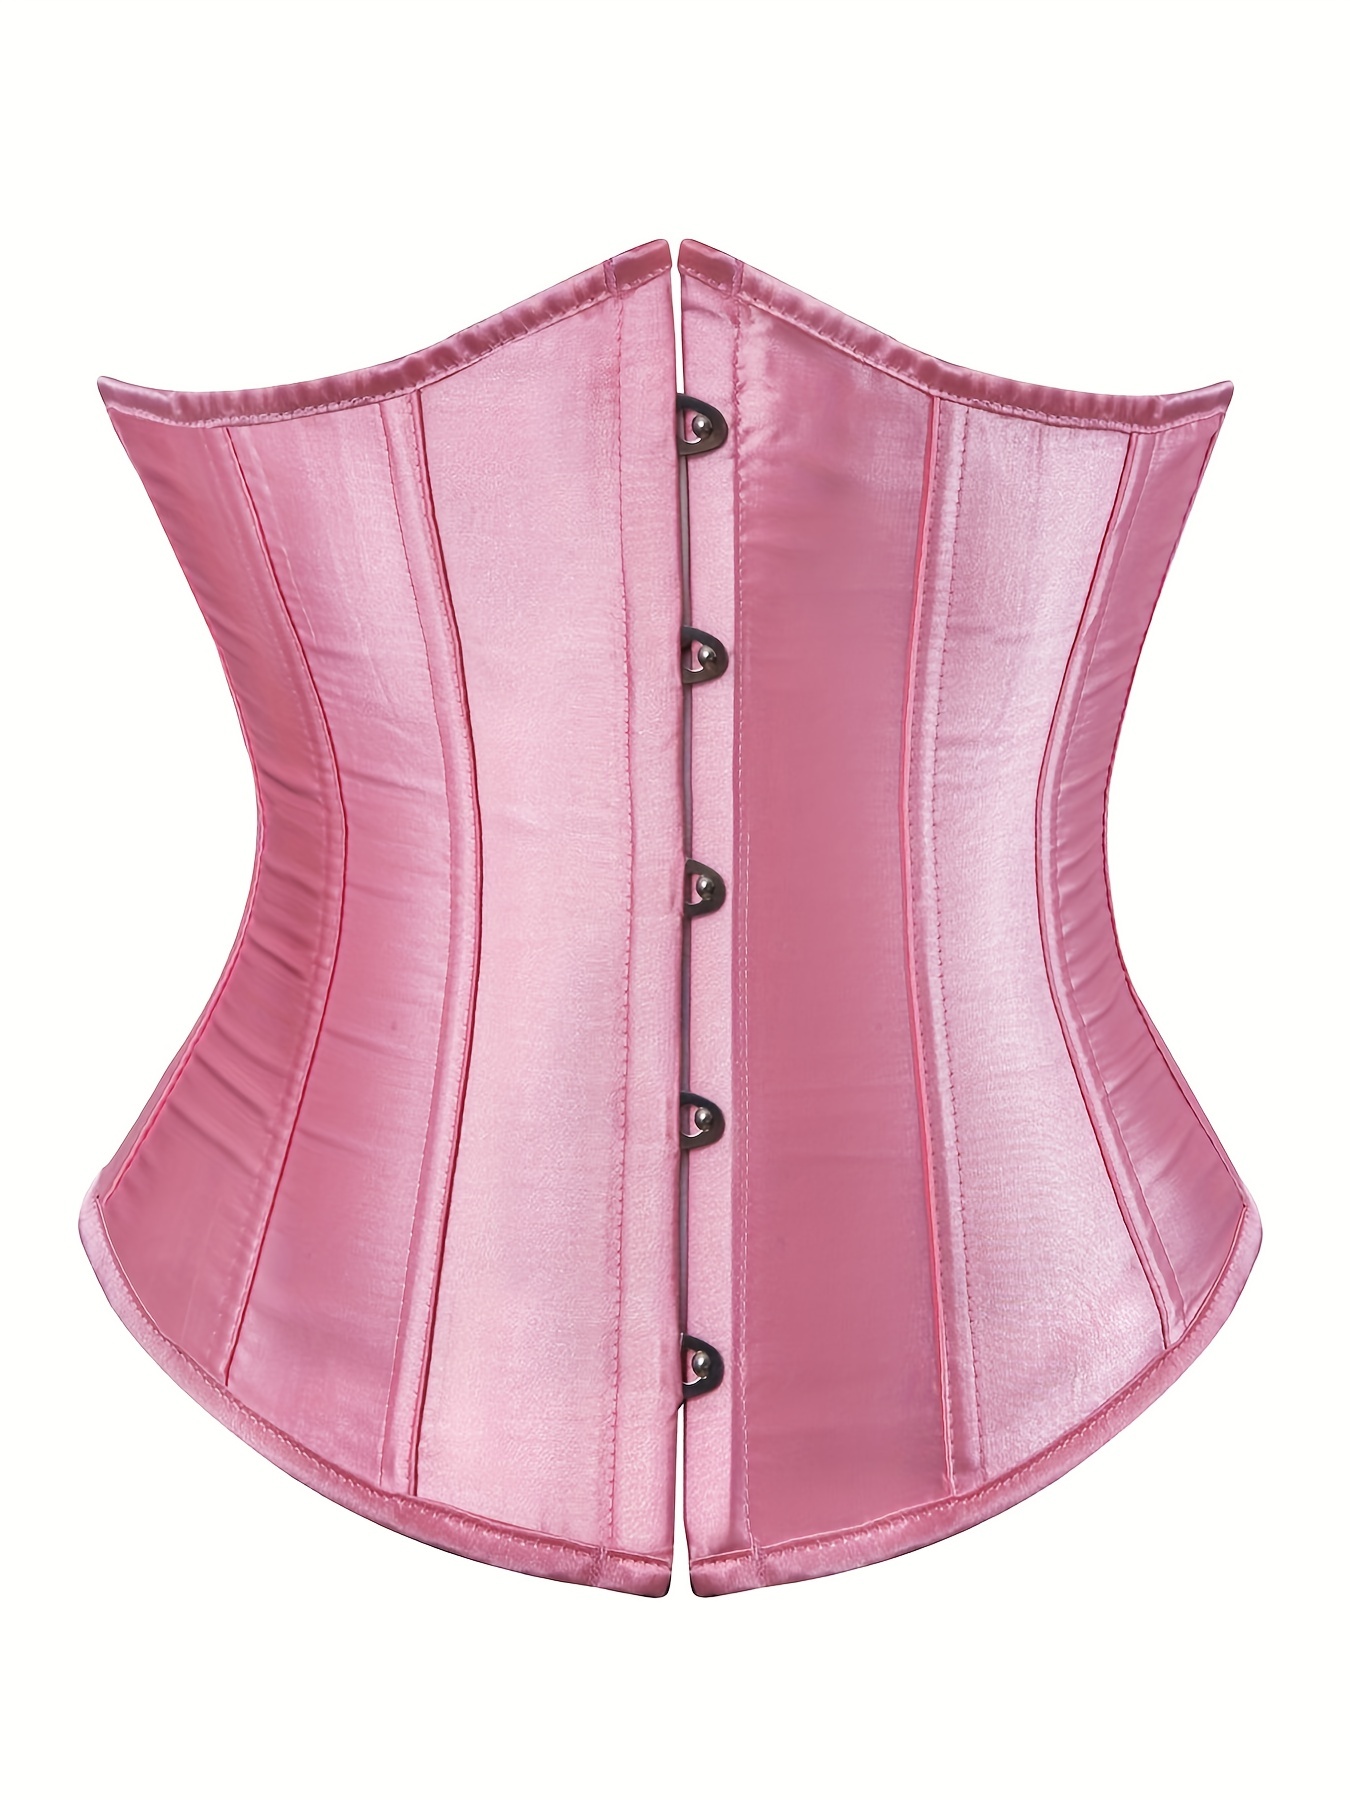 Juicy Couture Corset Small Waist Trainer Intimates Shaper Tummy